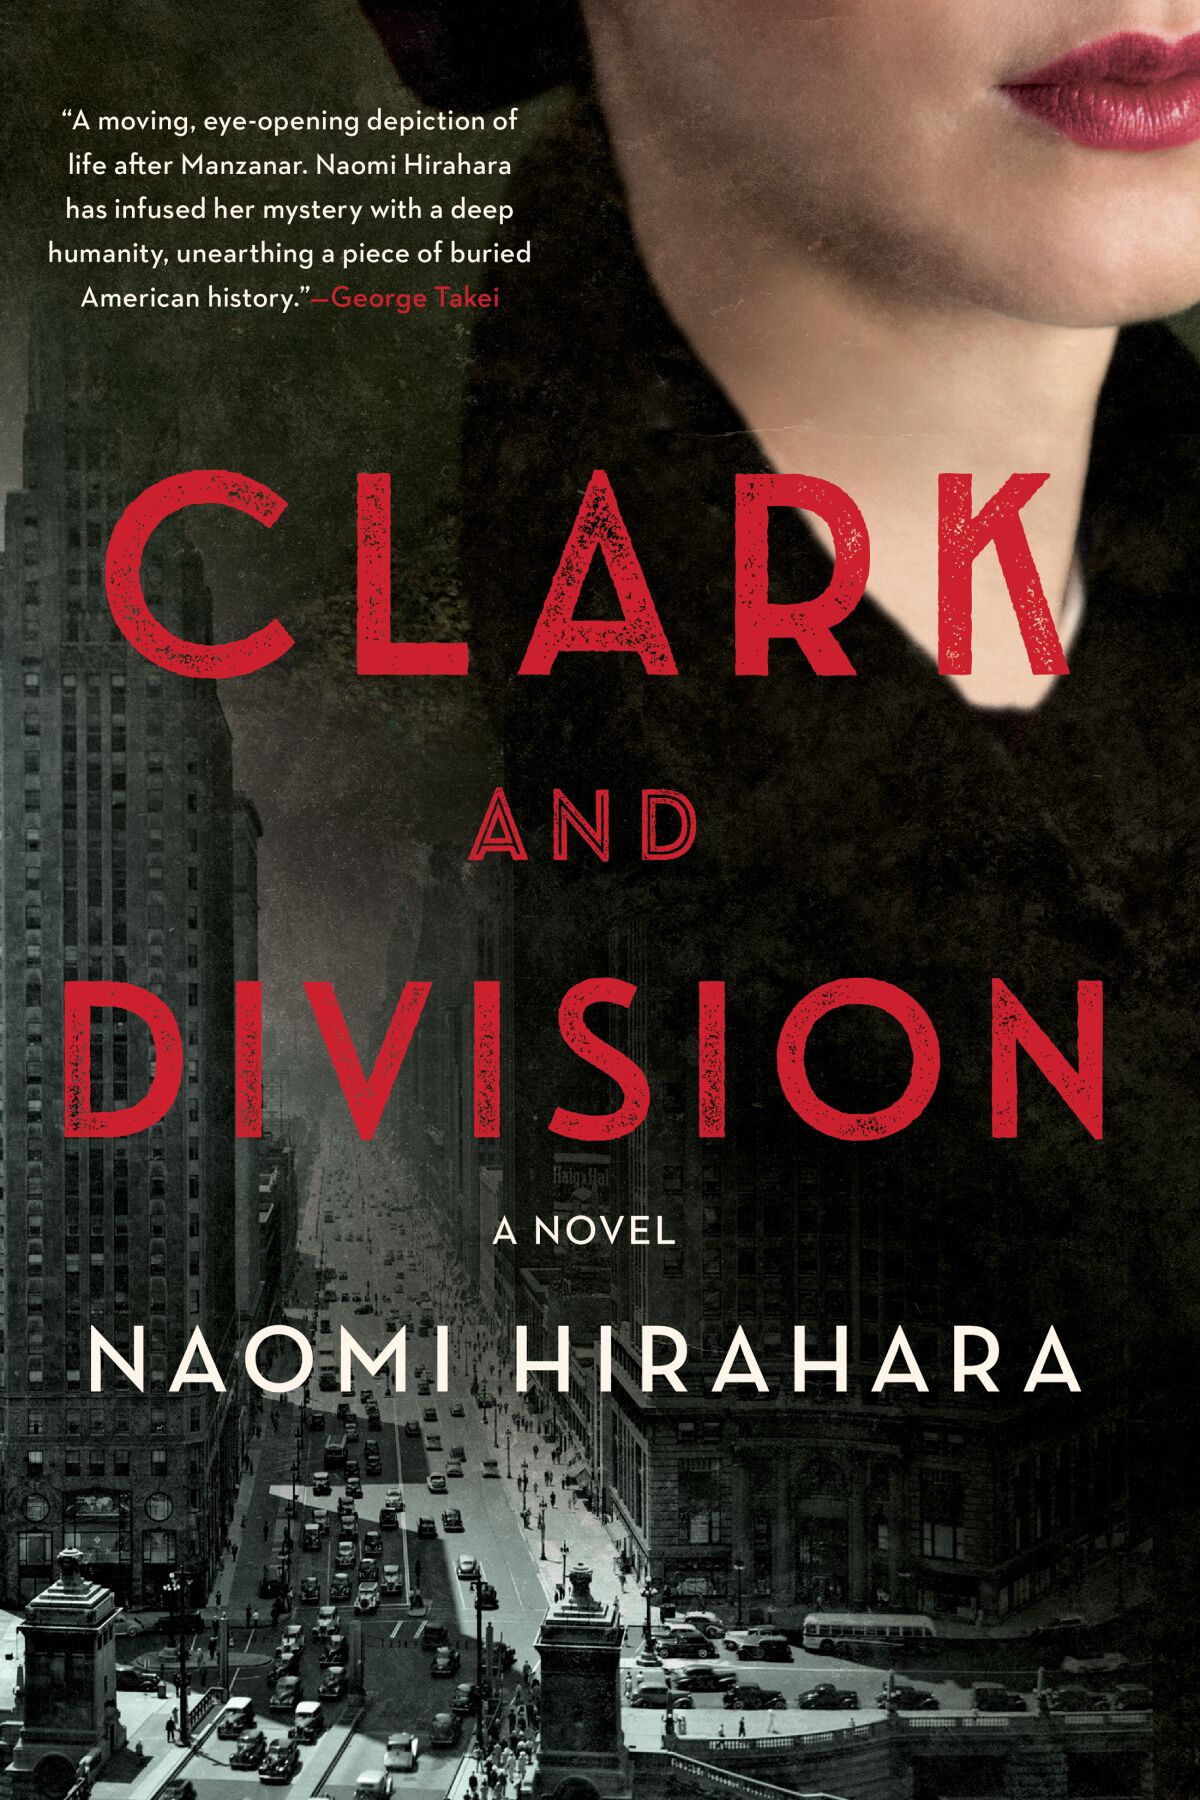 A book cover is a photo mashup of someone's face above a cityscape, with words "Clark and Division" in red in the forefront. 